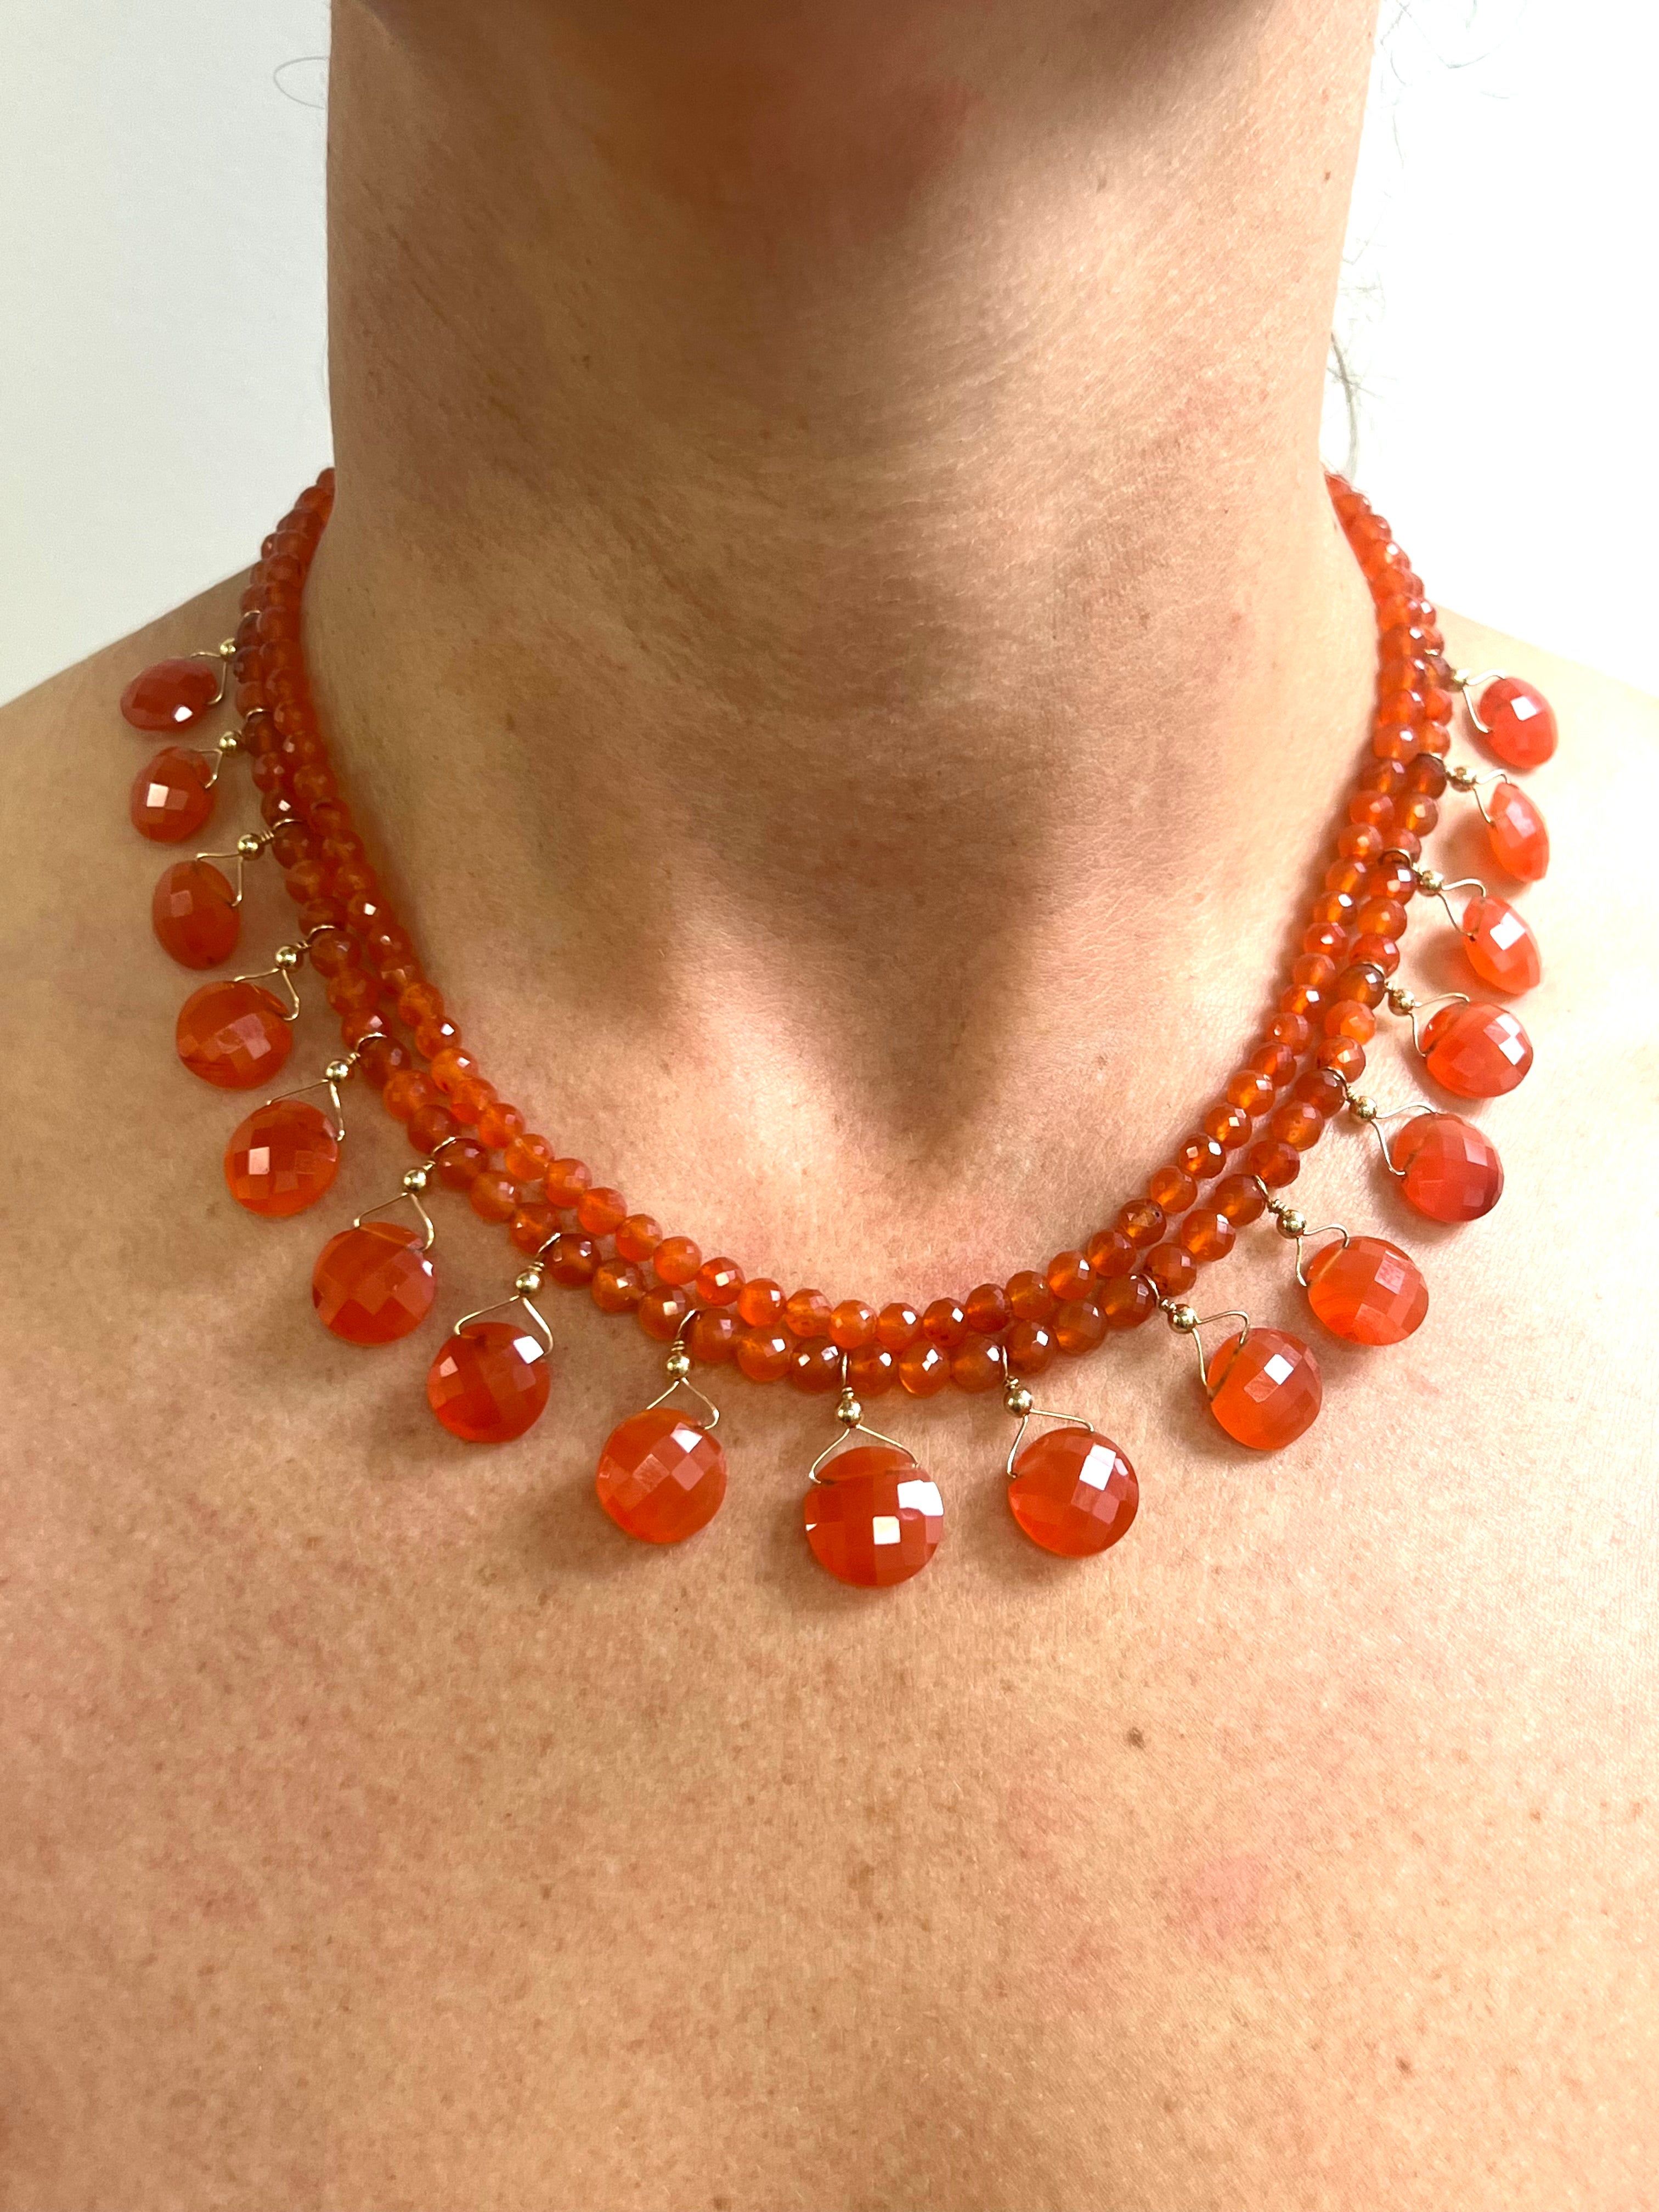 Description
Influenced by Cleopatra’s rich style and colorful jewelry, this Carnelian necklace radiates your personal powerful beauty as the magnificence of the past imbues the present simply by wearing this vibrant and alluring jewel. 
Item # N3466